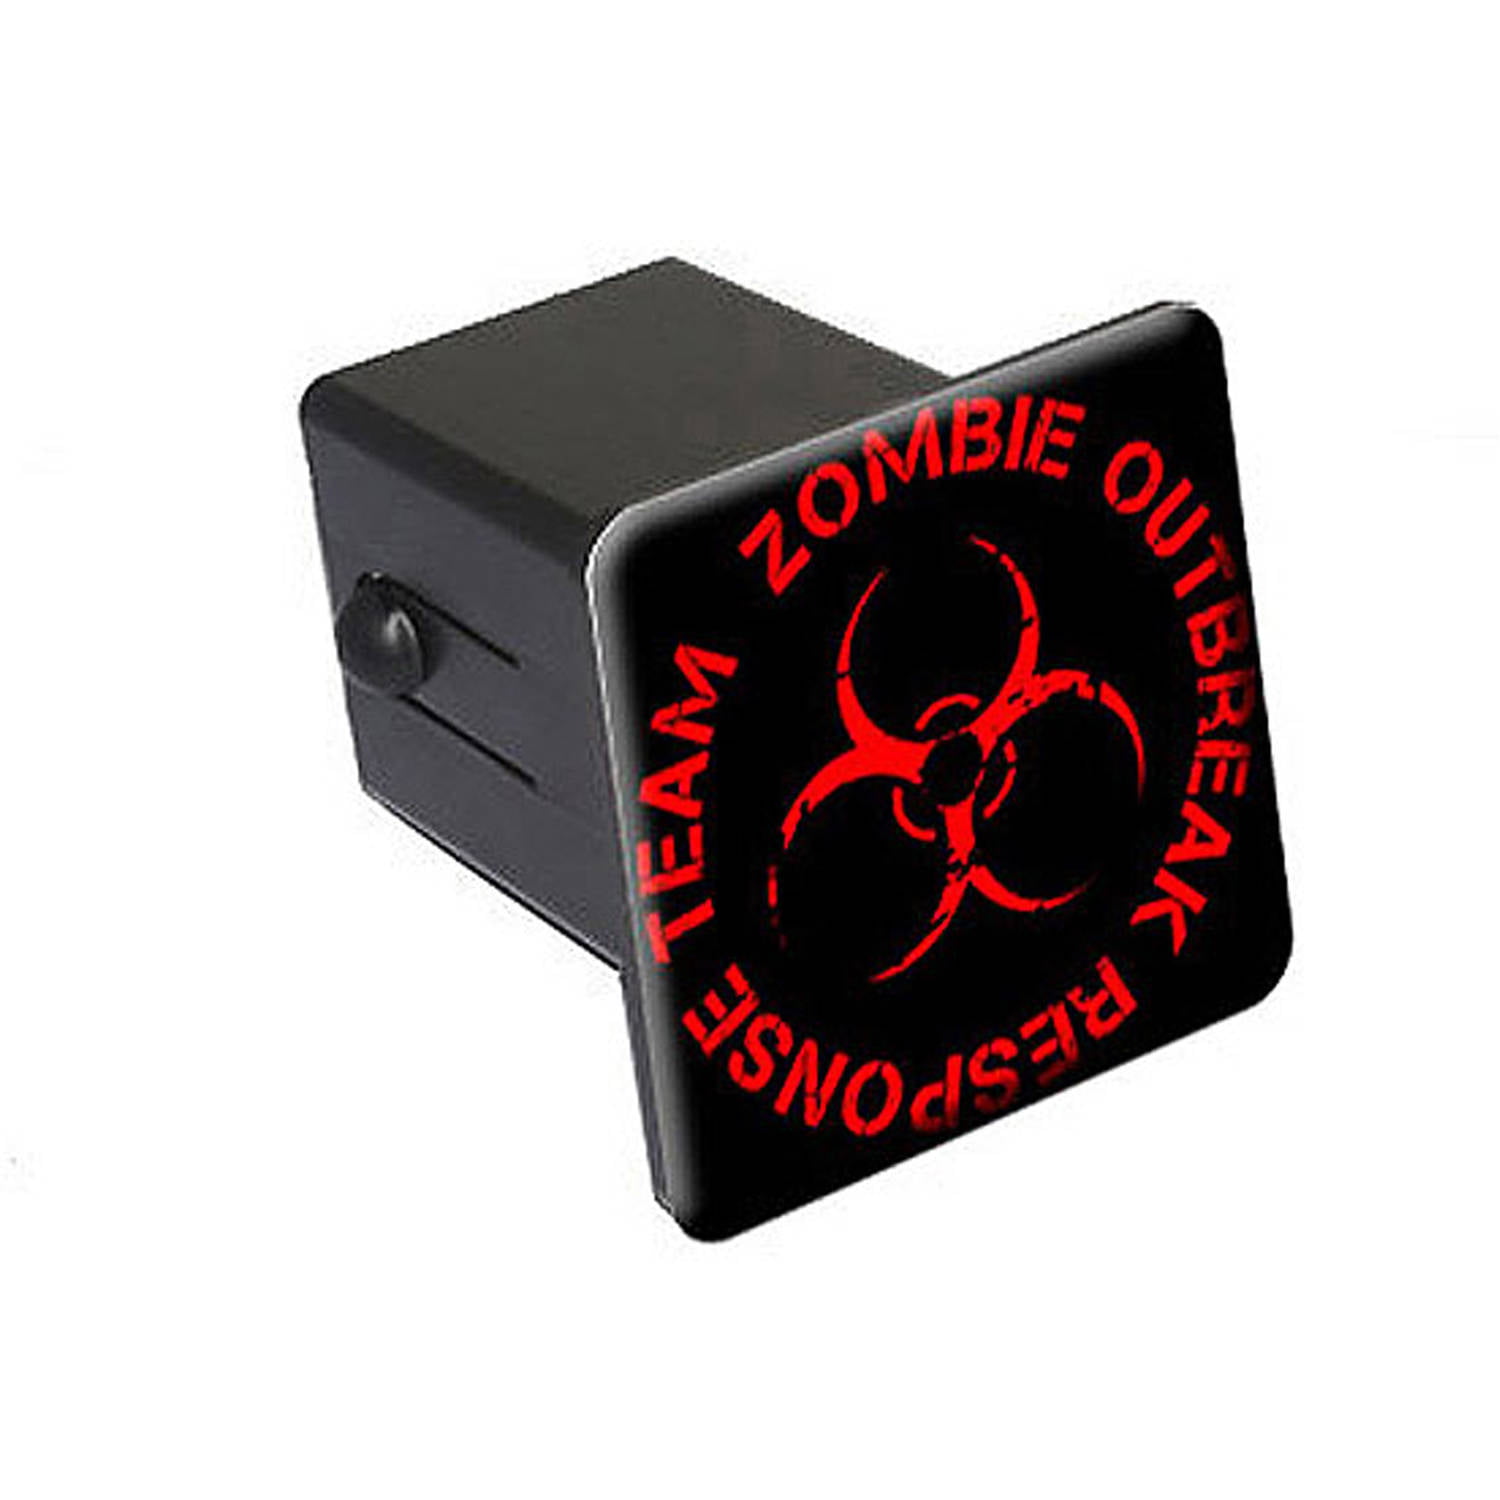 Graphics and More Zombie Outbreak Response Vehicle Tow Trailer Hitch Cover Plug Insert 2 